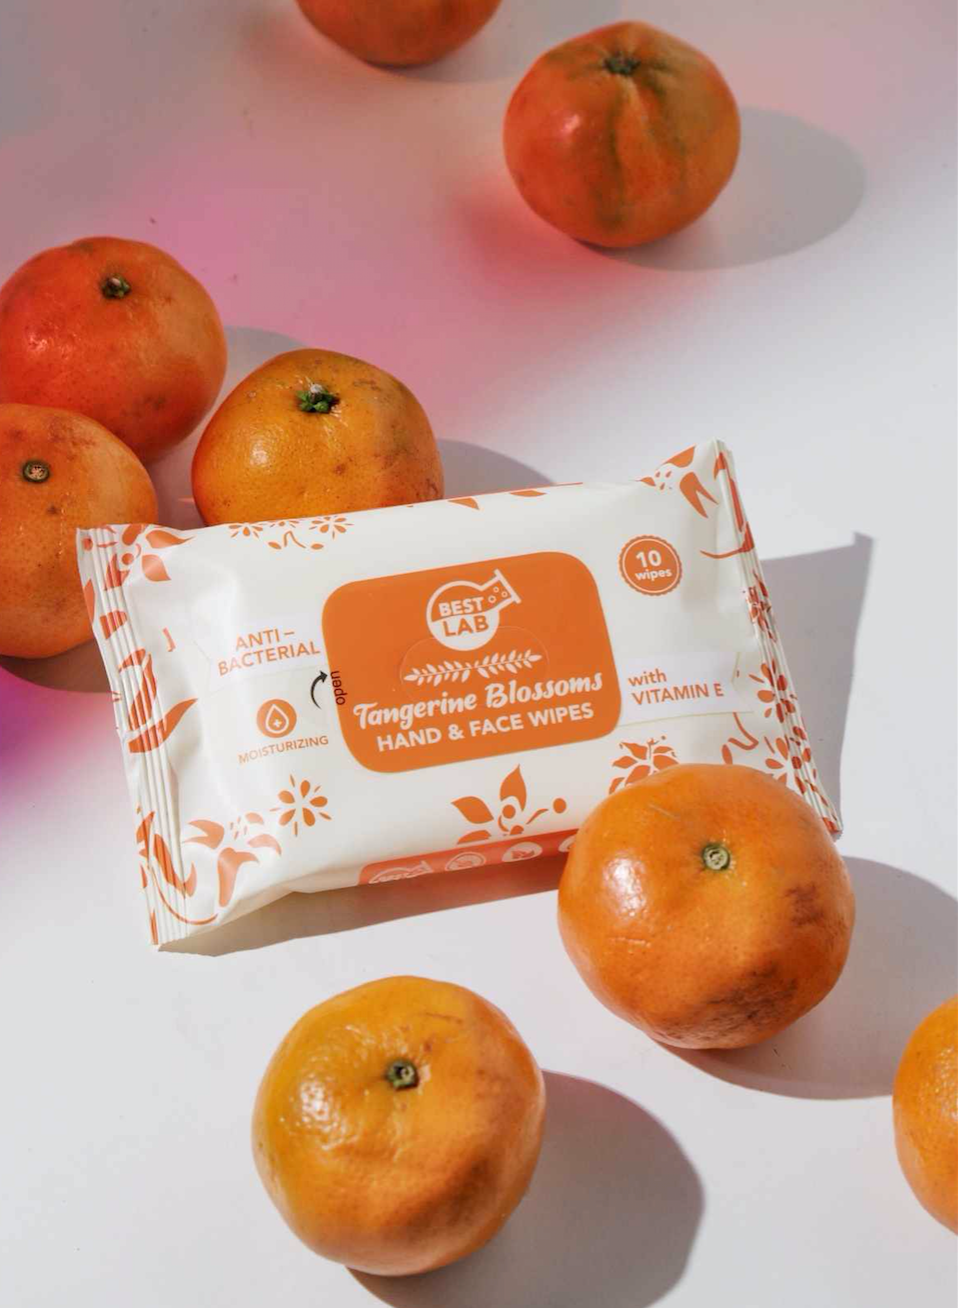 TANGERINE BLOSSOM  HAND AND FACE WIPES  (Anti-Bacterial, Moisturizing, with Vitamin E)-10 Pulls